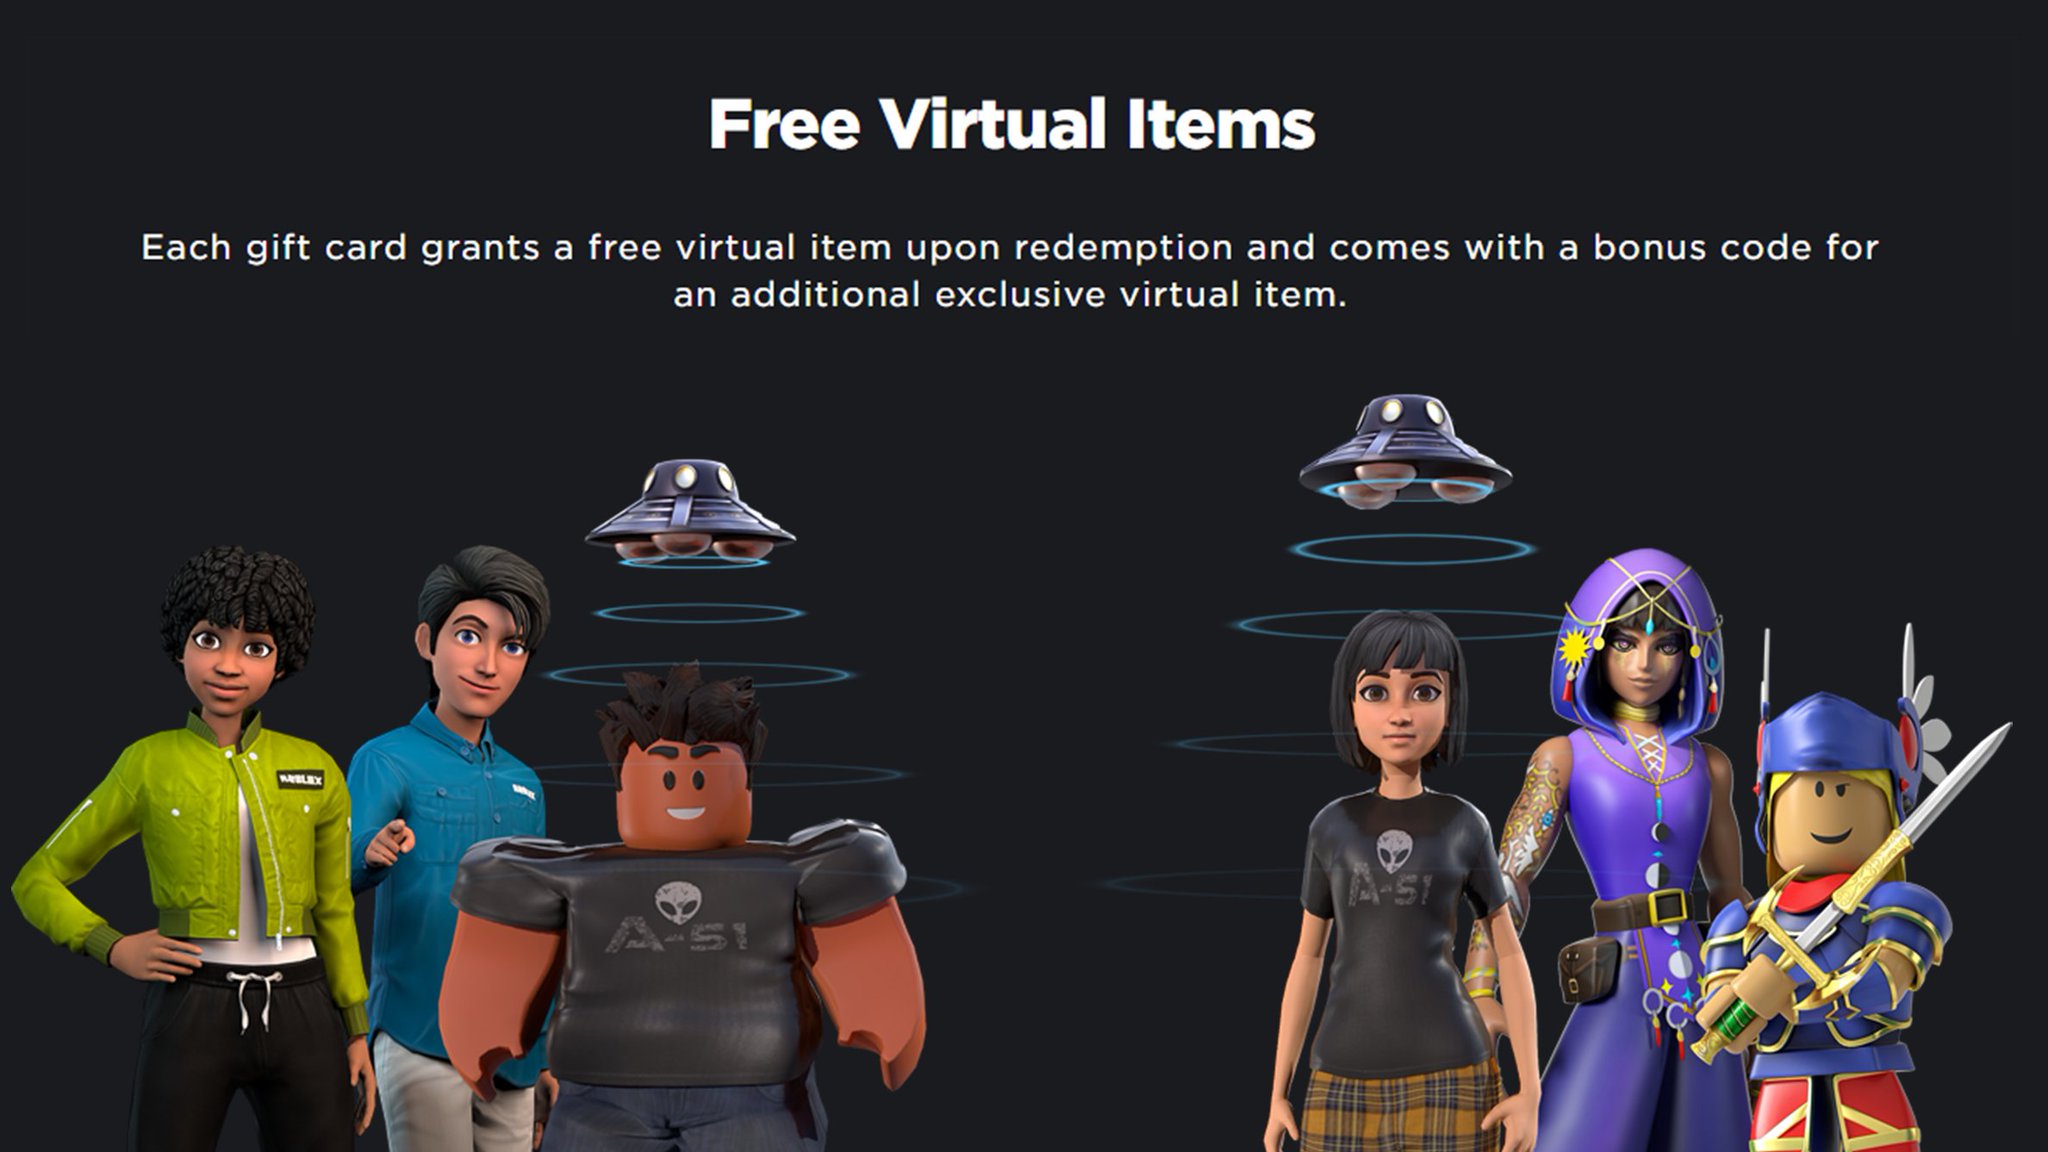 Bloxy News on X: The perfect gift for any #Roblox fan. ⛷️ Every purchase  of a Roblox Gift Card from select retailers grants a FREE virtual item for  your avatar upon redemption!